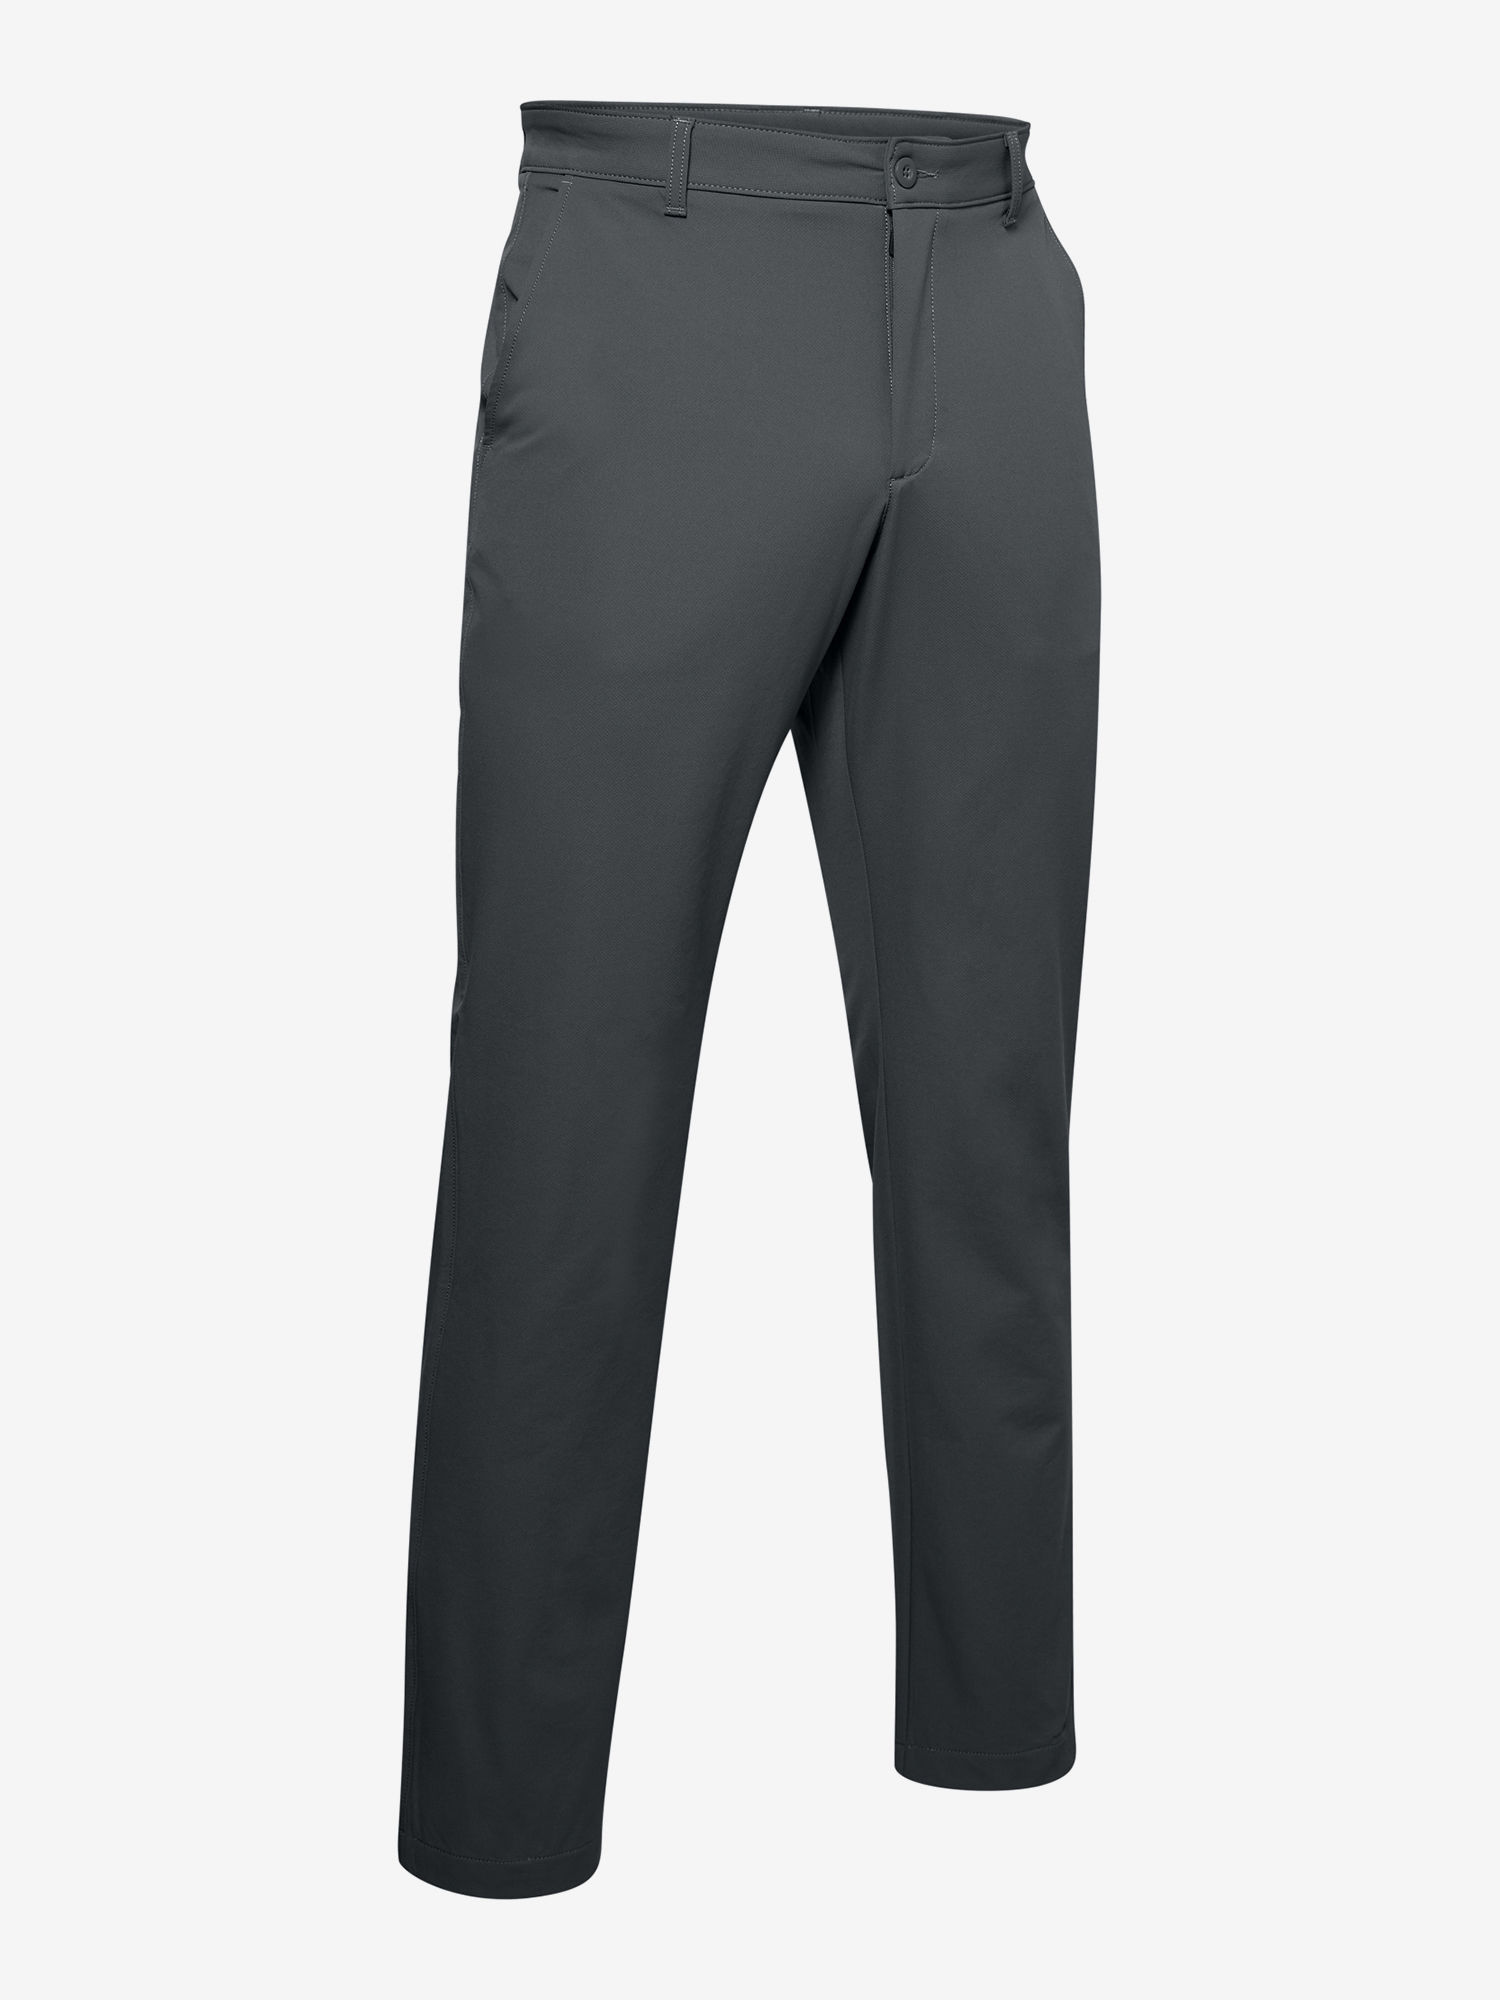 Nohavice Under Armour Tech Pant-GRY (4)